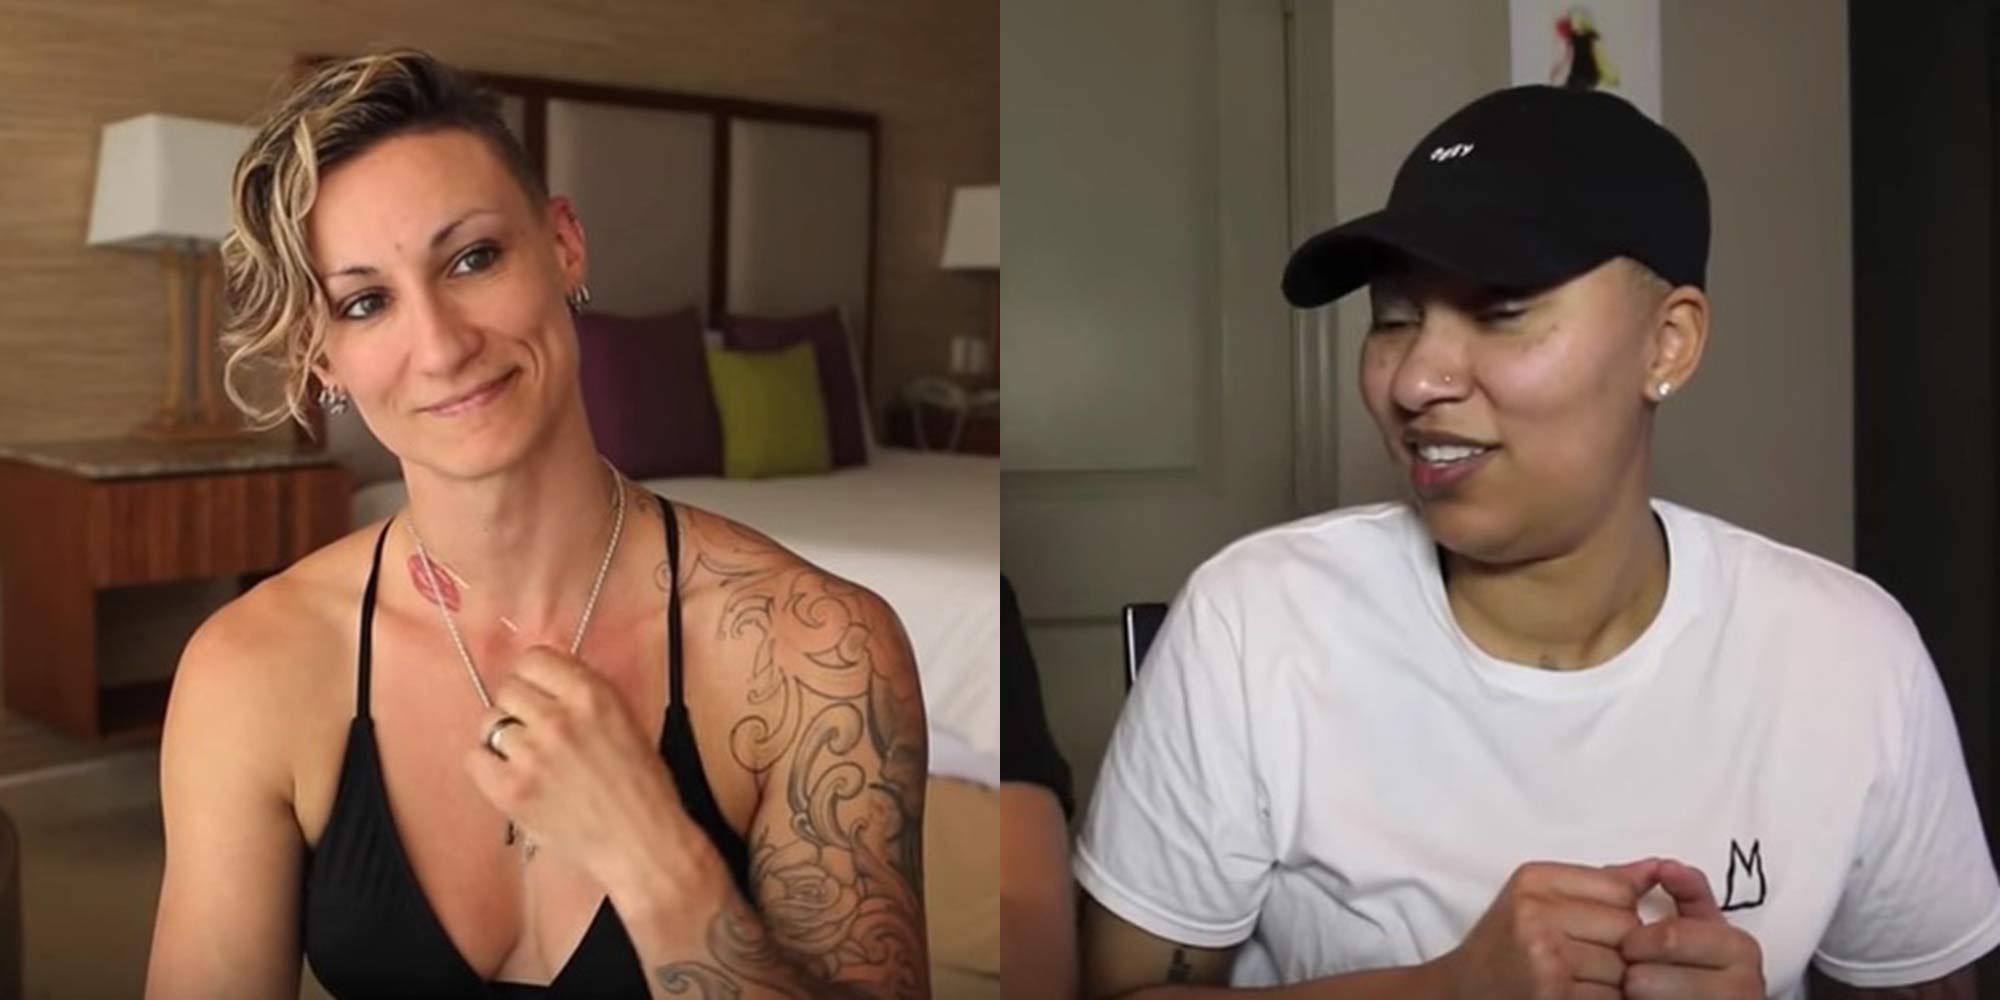 These women are challenging butch stereotypes by speaking about their roles in the bedroom image